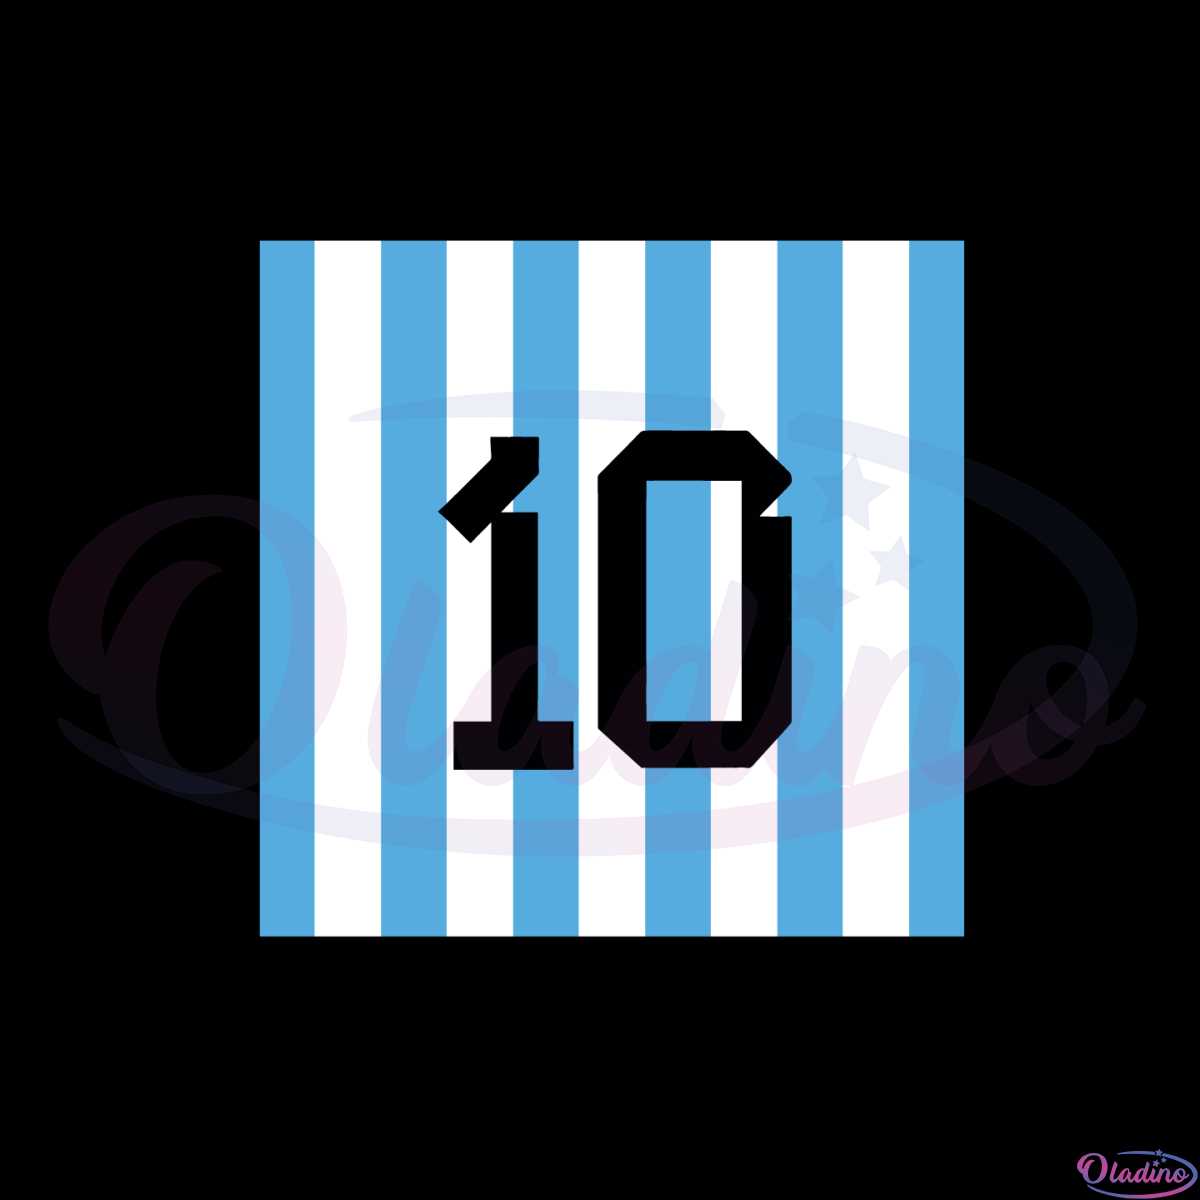 argentina-clothers-number-lionel-messi-svg-cutting-files